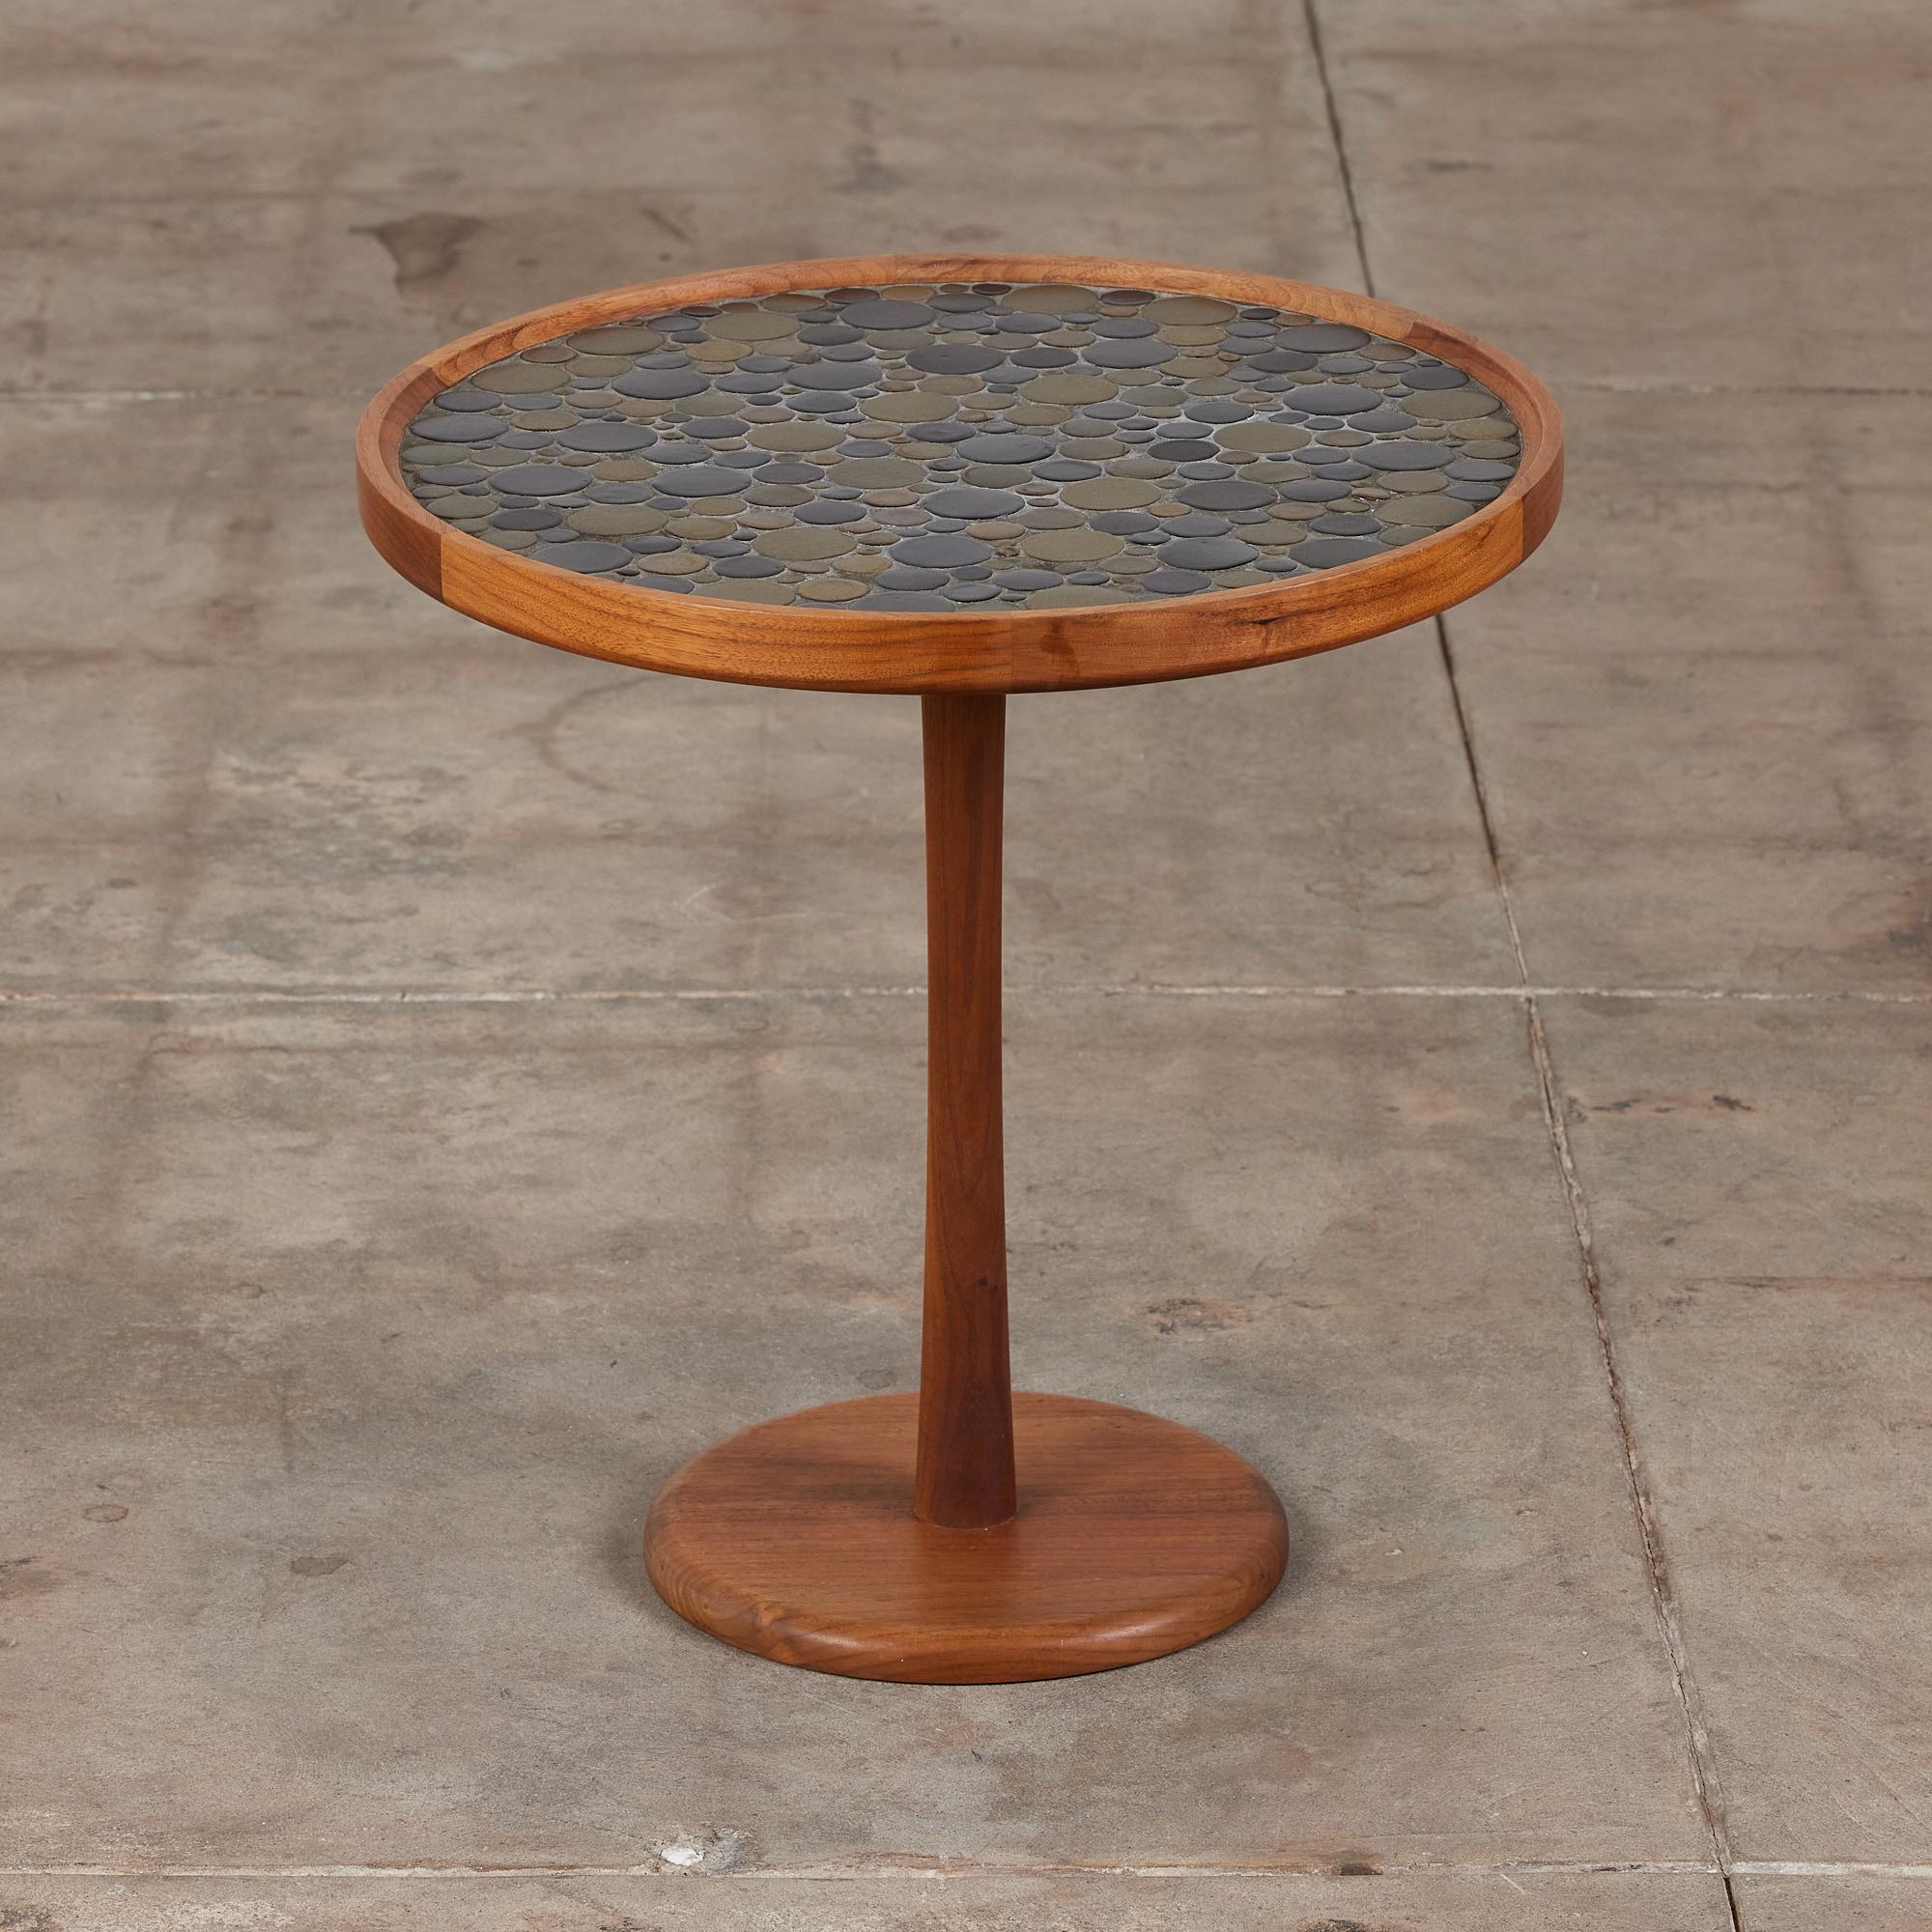 Round side table by Gordon & Jane Martz. The table top is inlaid with ceramic coin tiles in varying brown and black tones. The frame, base and pedestal of the table are all solid walnut.

Dimensions: 20.25